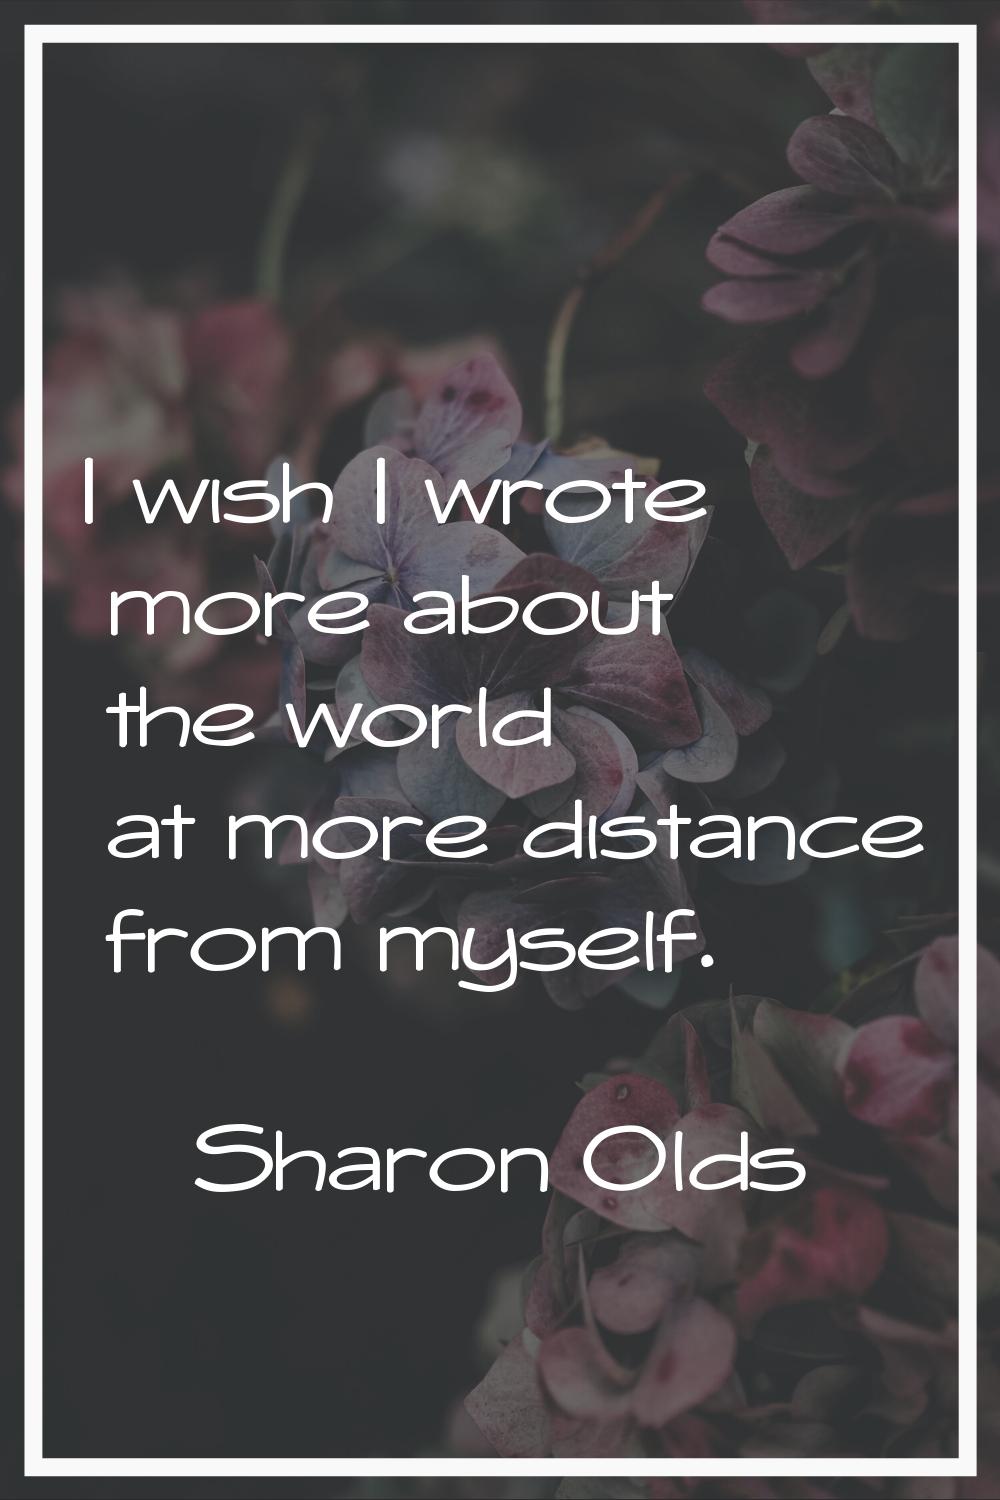 I wish I wrote more about the world at more distance from myself.